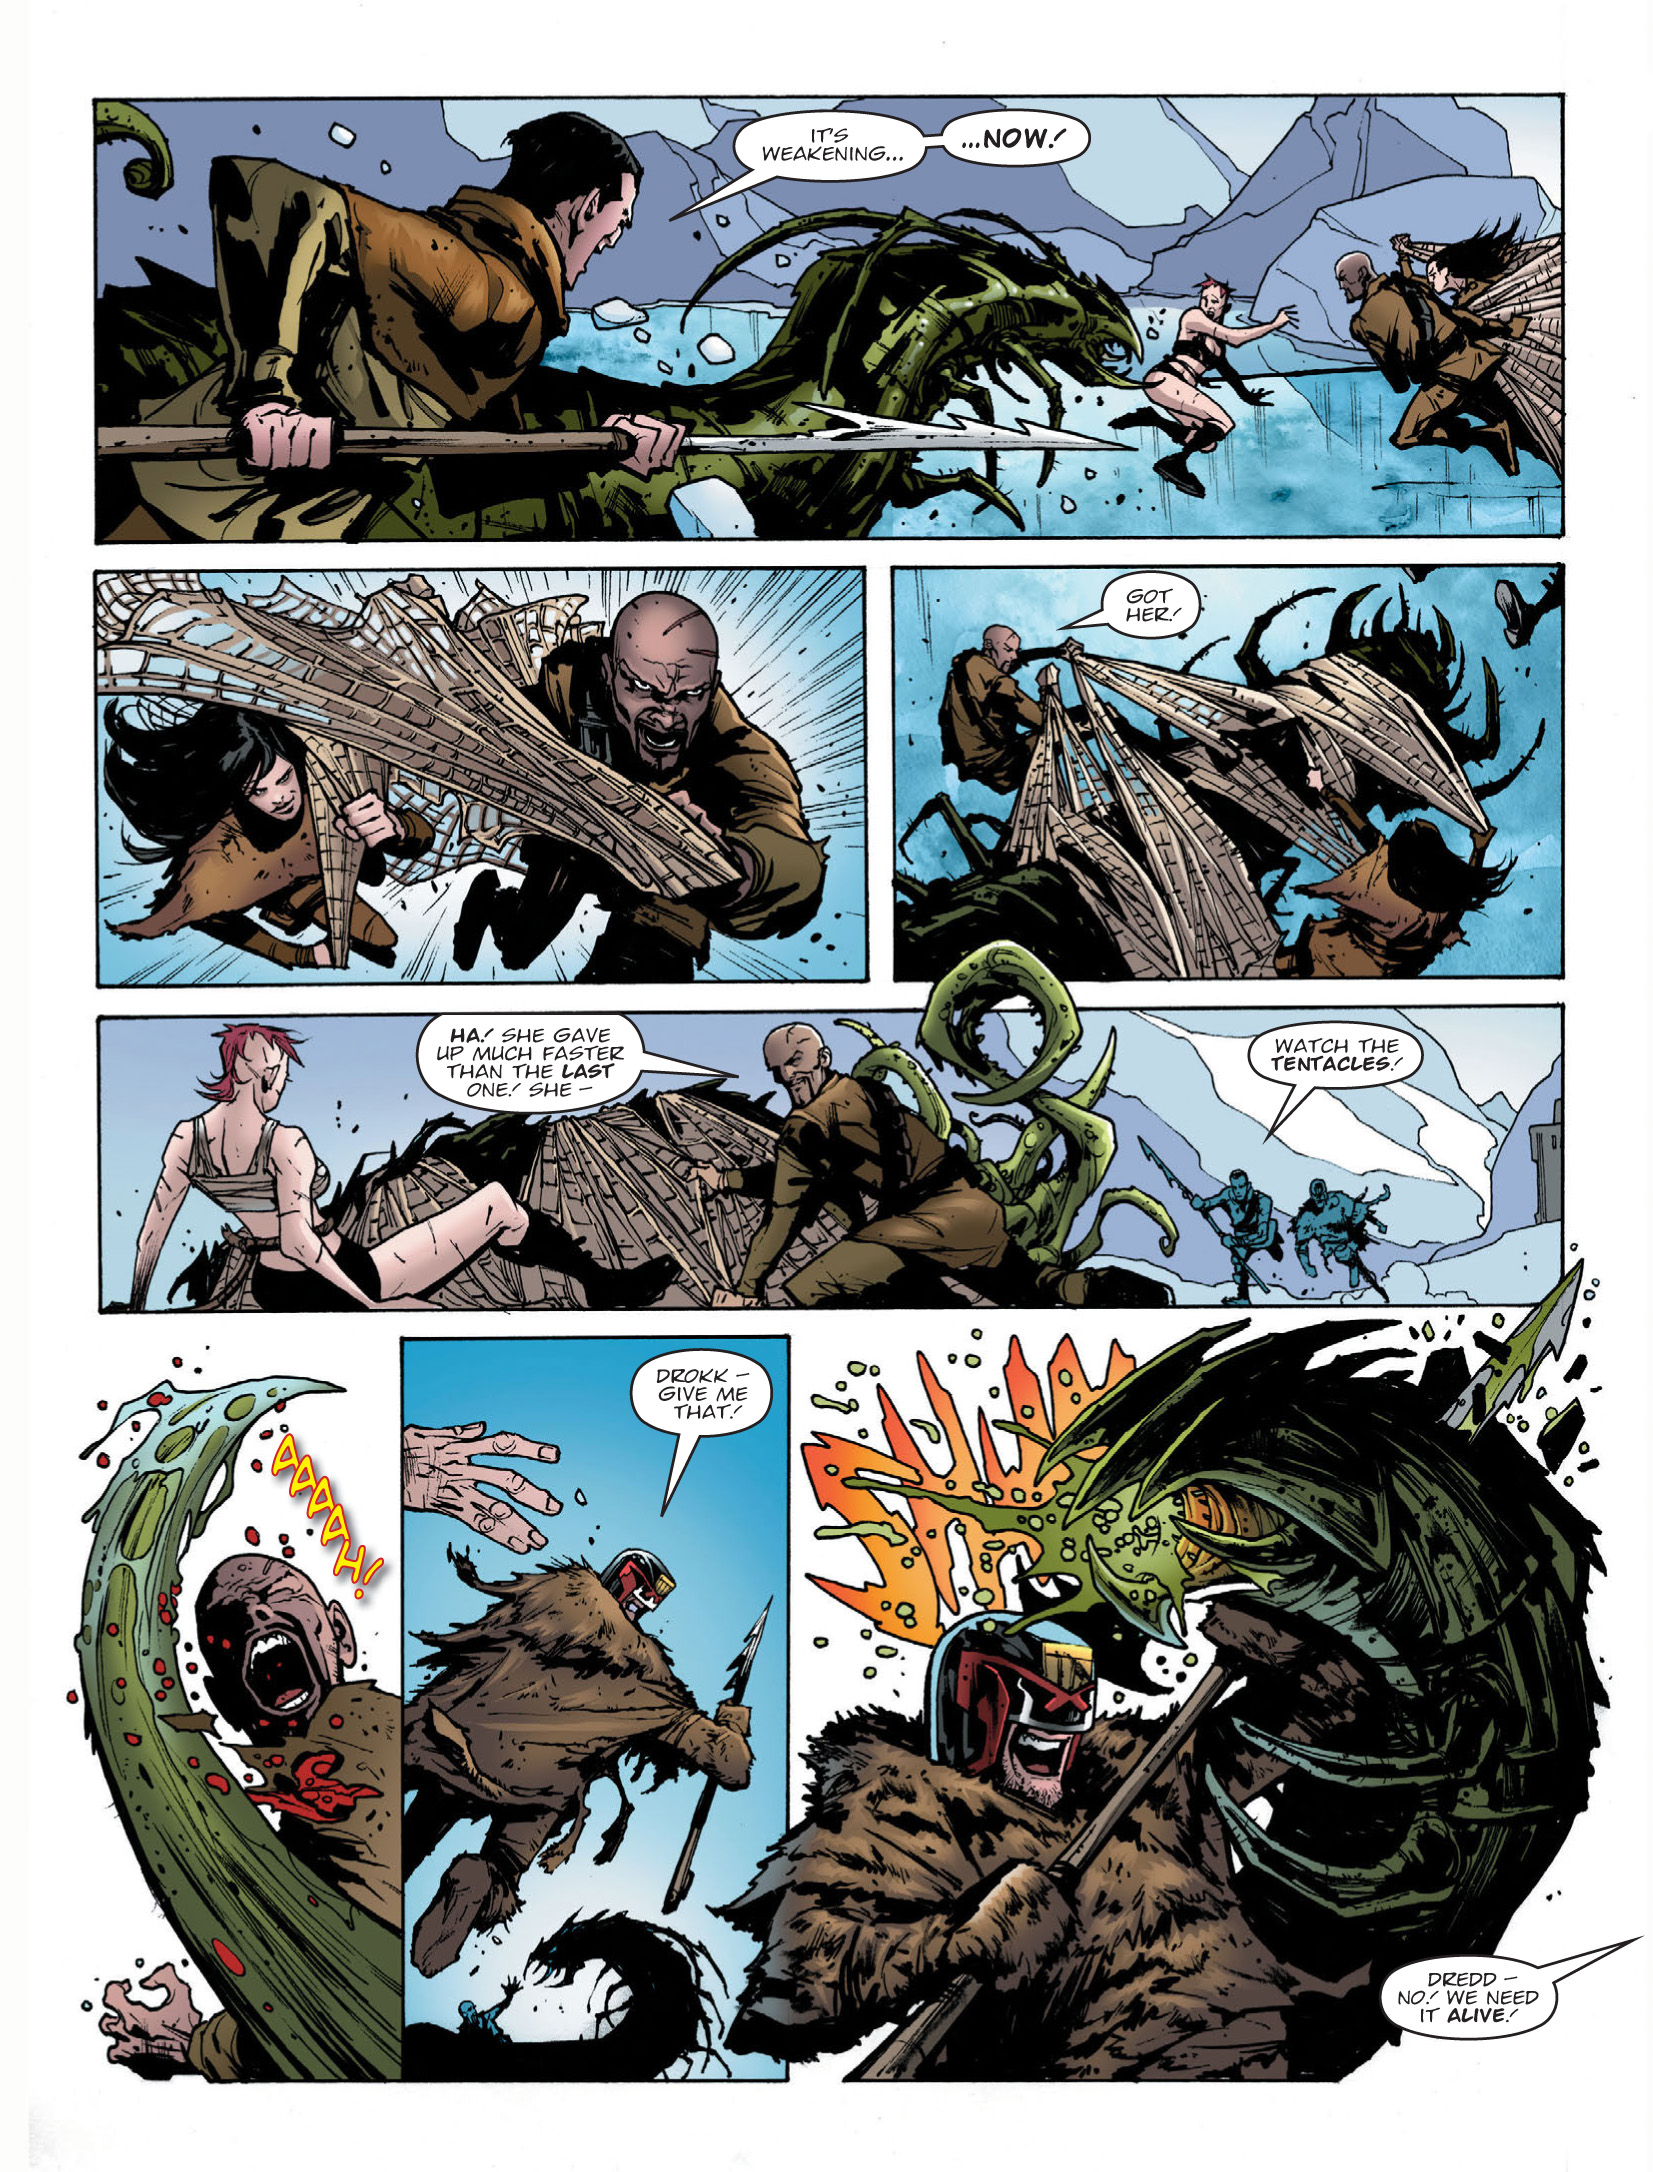 2000 AD: Chapter 2066 - Page 4